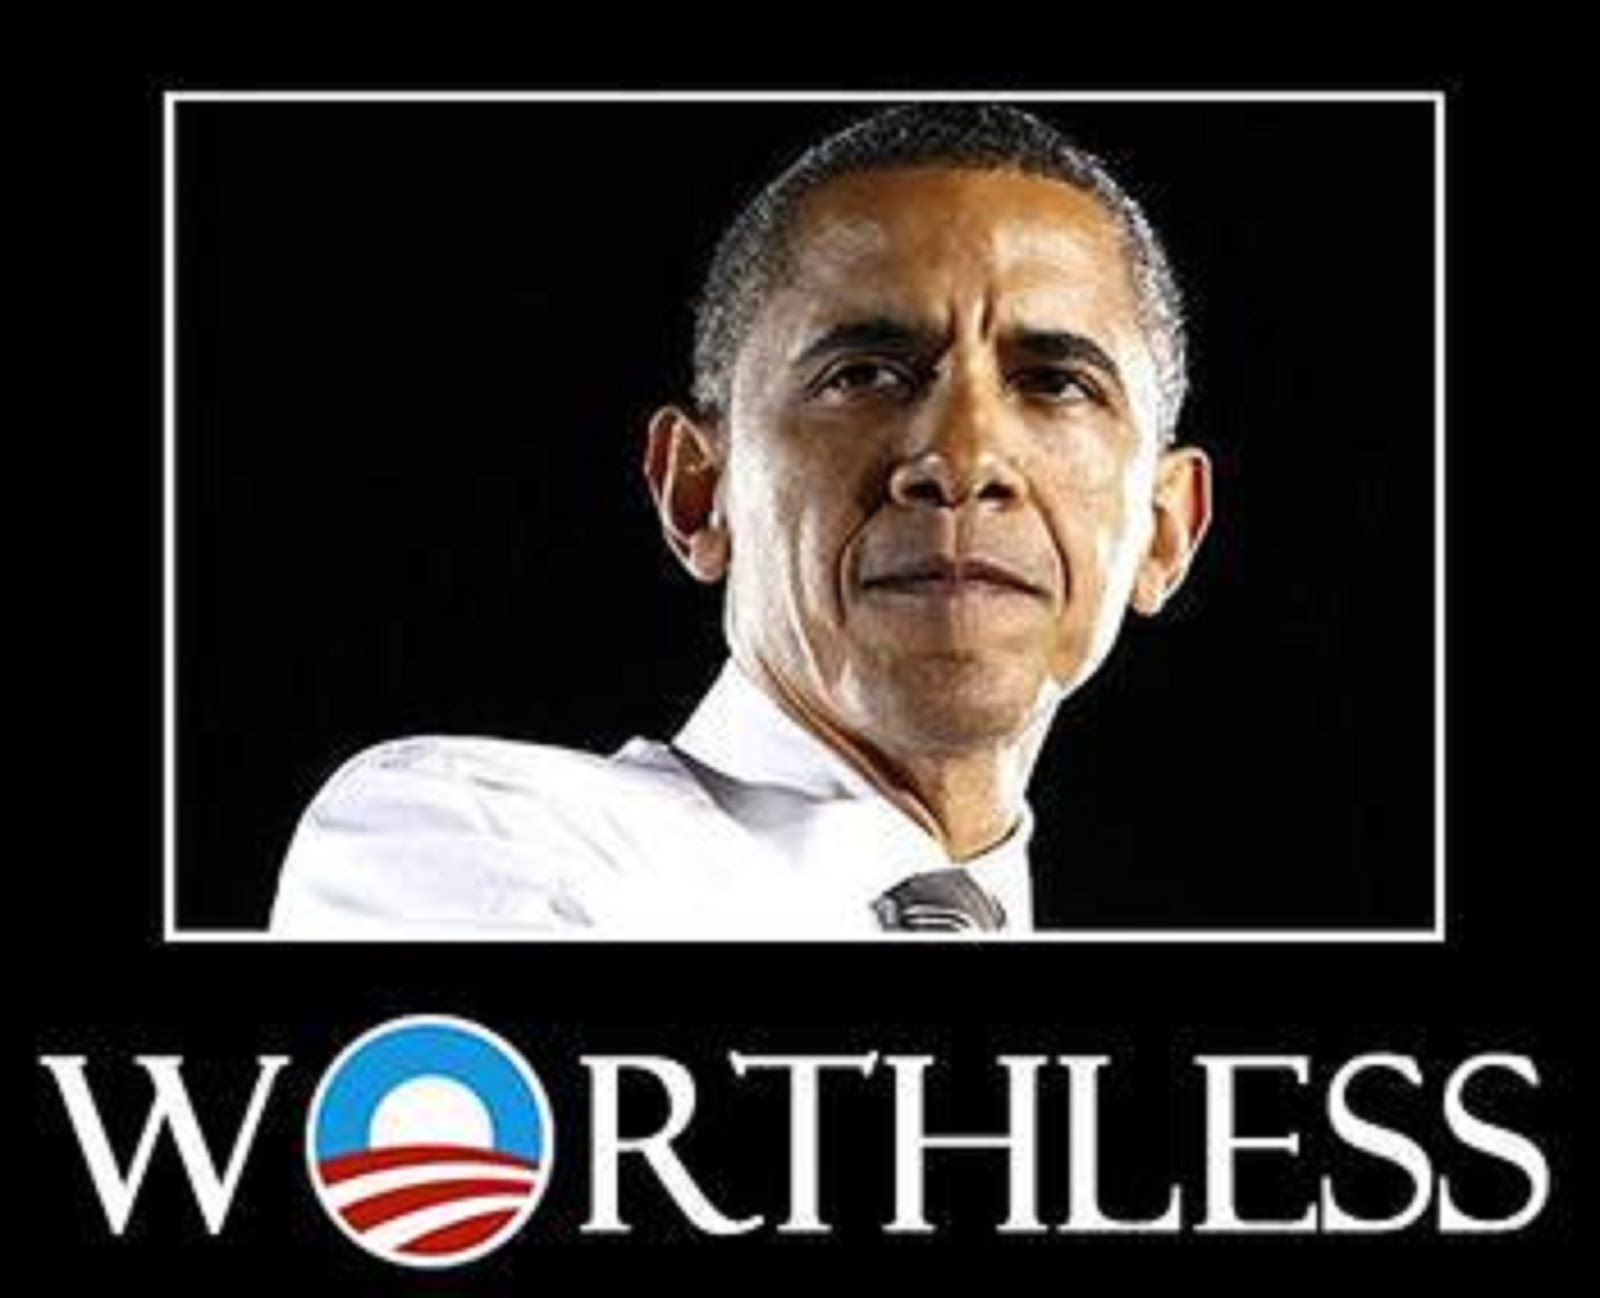 OBAMA IS A WORTHLESS